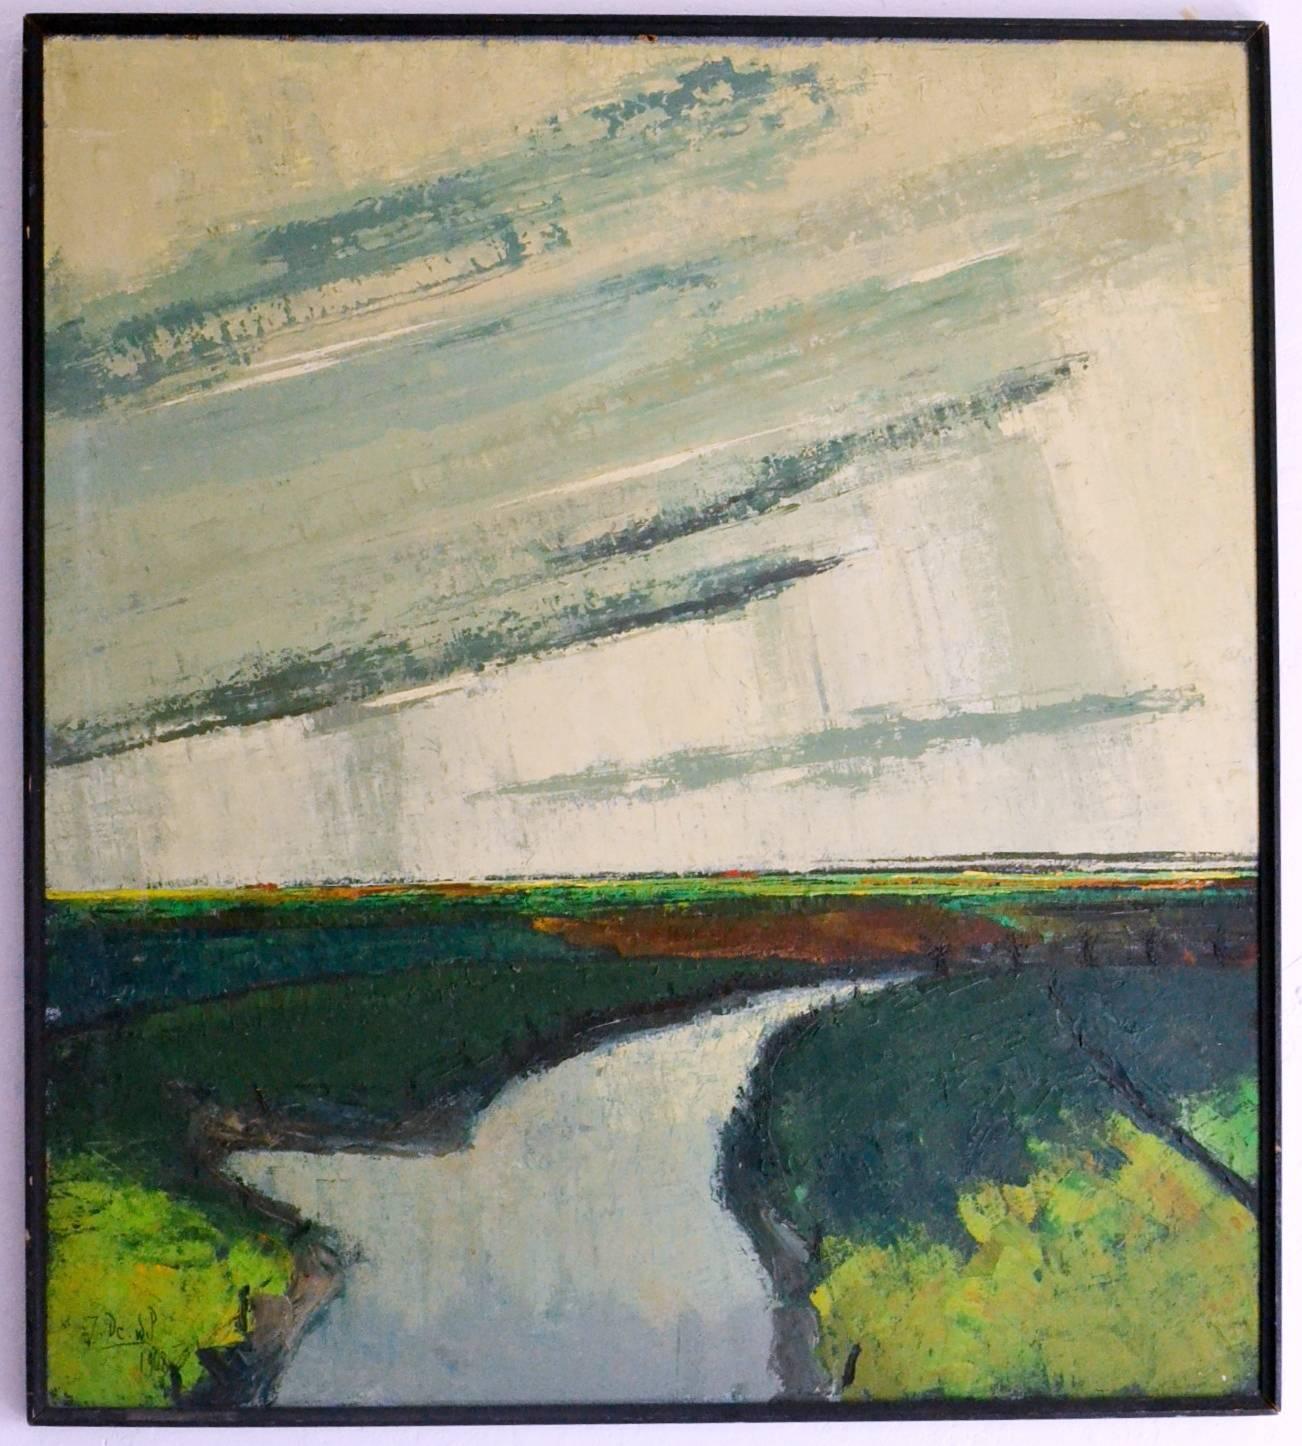 Atmospheric expressive landscape oil painting by Flemish artist Jozef Lodewijk Frans de Wil, Antwerp 1920-Lier 1992,signed. This subtitle oil painting shows the wind and weather affecting the light that shines on calm flat landscape in a dynamic way